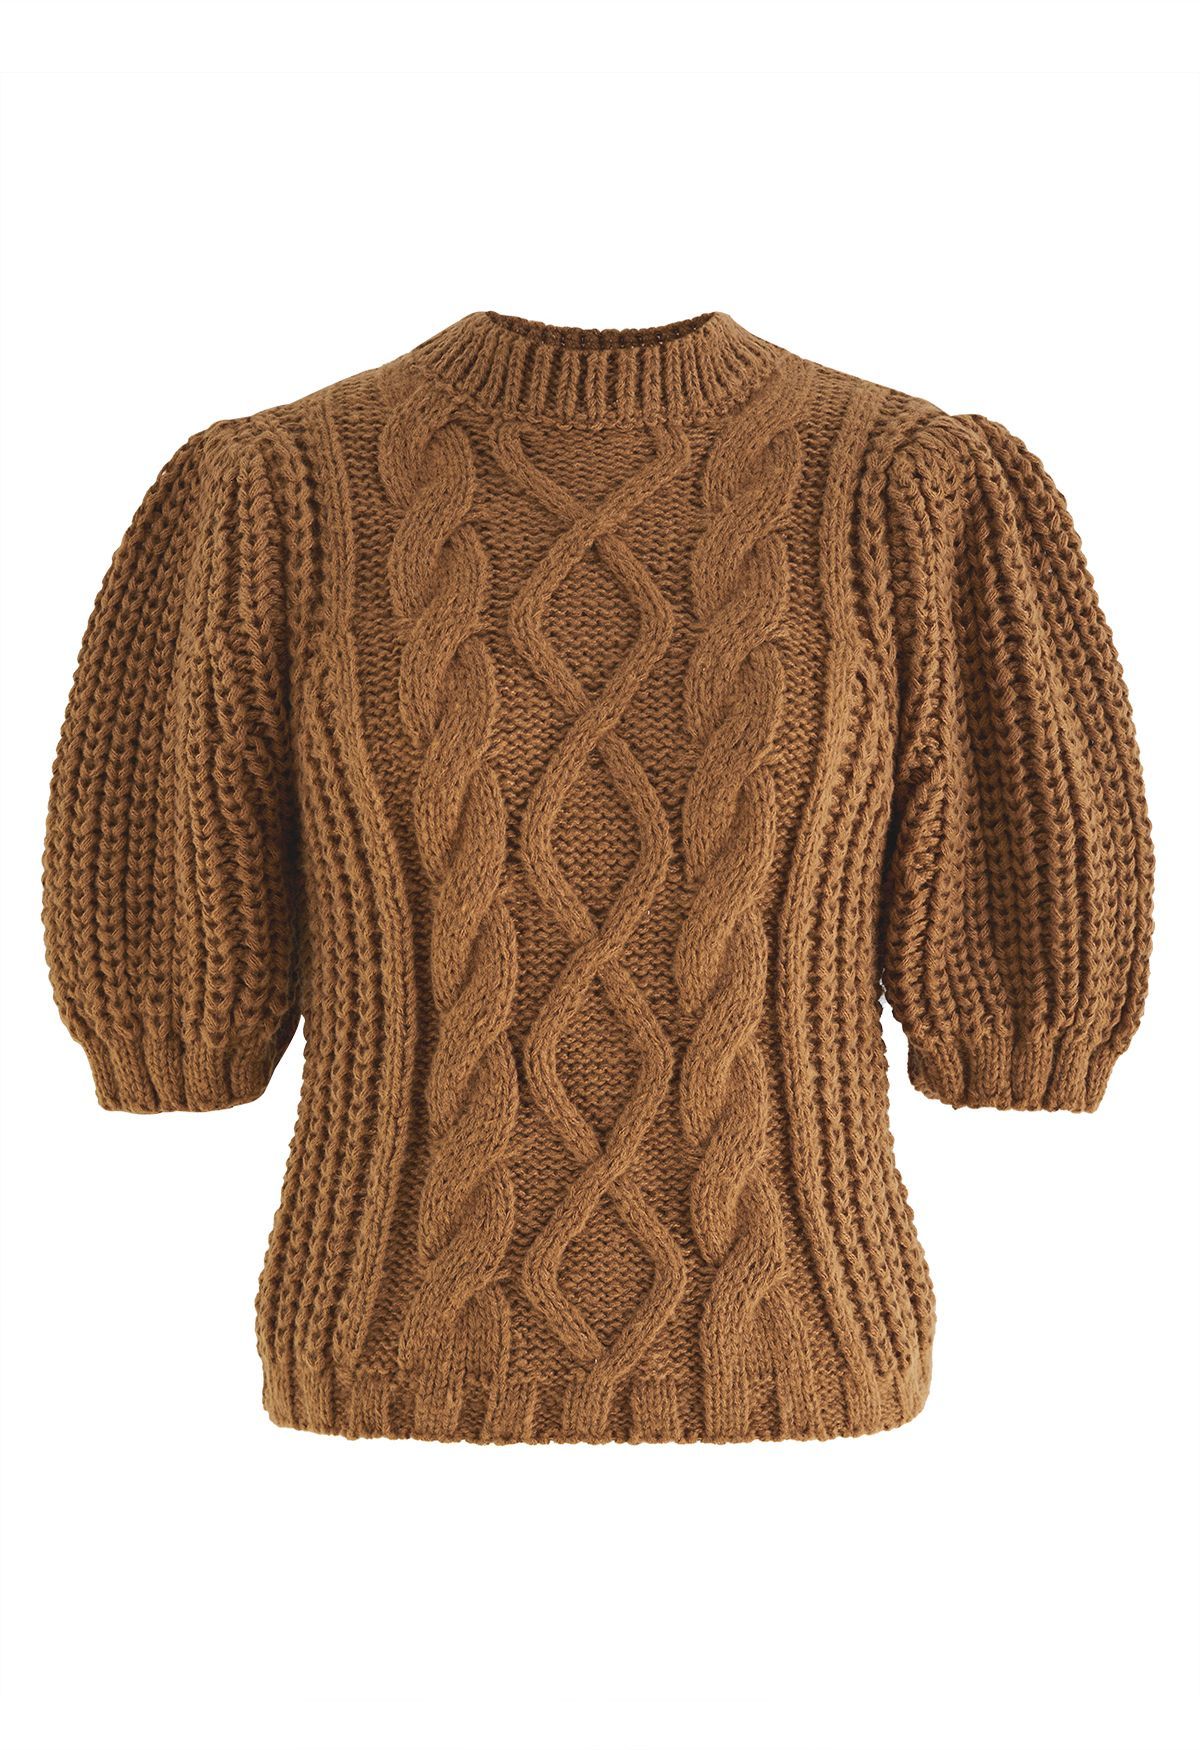 Bubble Sleeve Braided Ribbed Sweater in Tan | Chicwish